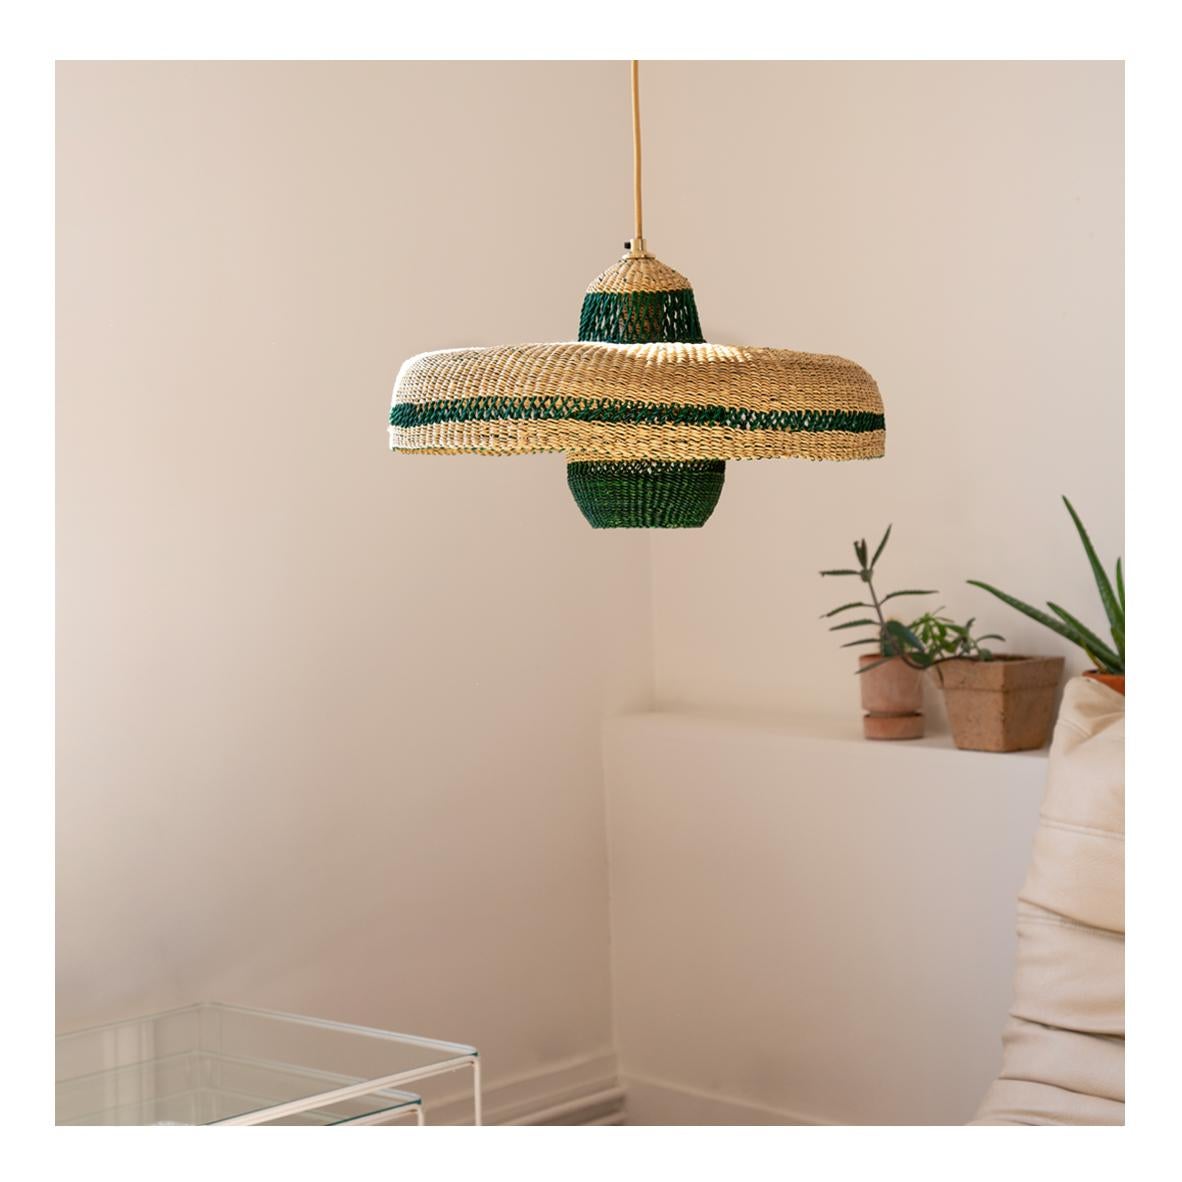 Woven Pendant Lamp HATTER + LANTERN: 
Dynamic and natural
Colour: Natural and Herb (Bottle Green)

Are you looking for a unique lamp that marries artisan and design? This sculptural lamp gives artisanat an arty twist with it´s two shapes a flat